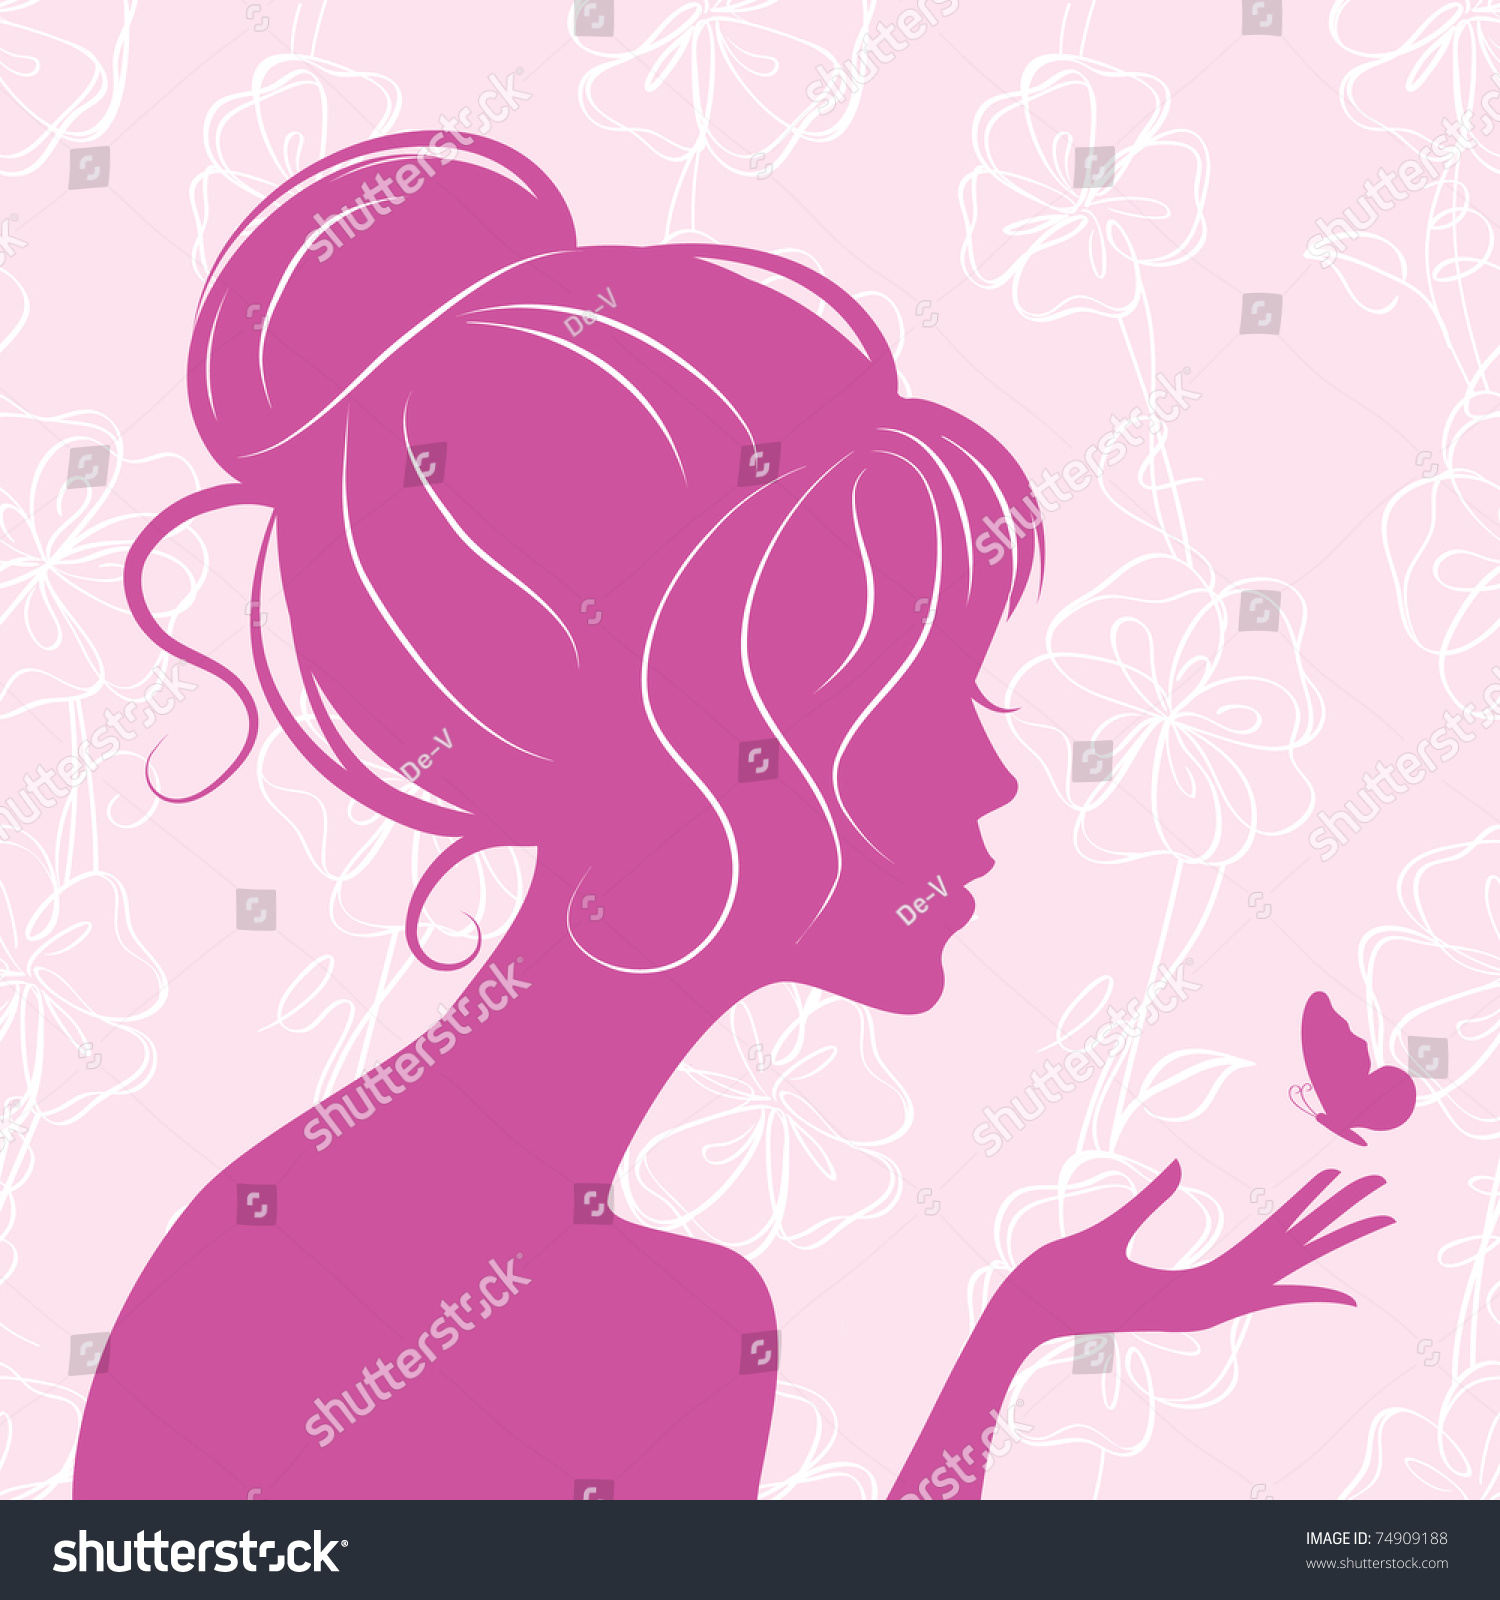 Download Beauty Girl Silhouette Butterfly Stock Vector 74909188 ...